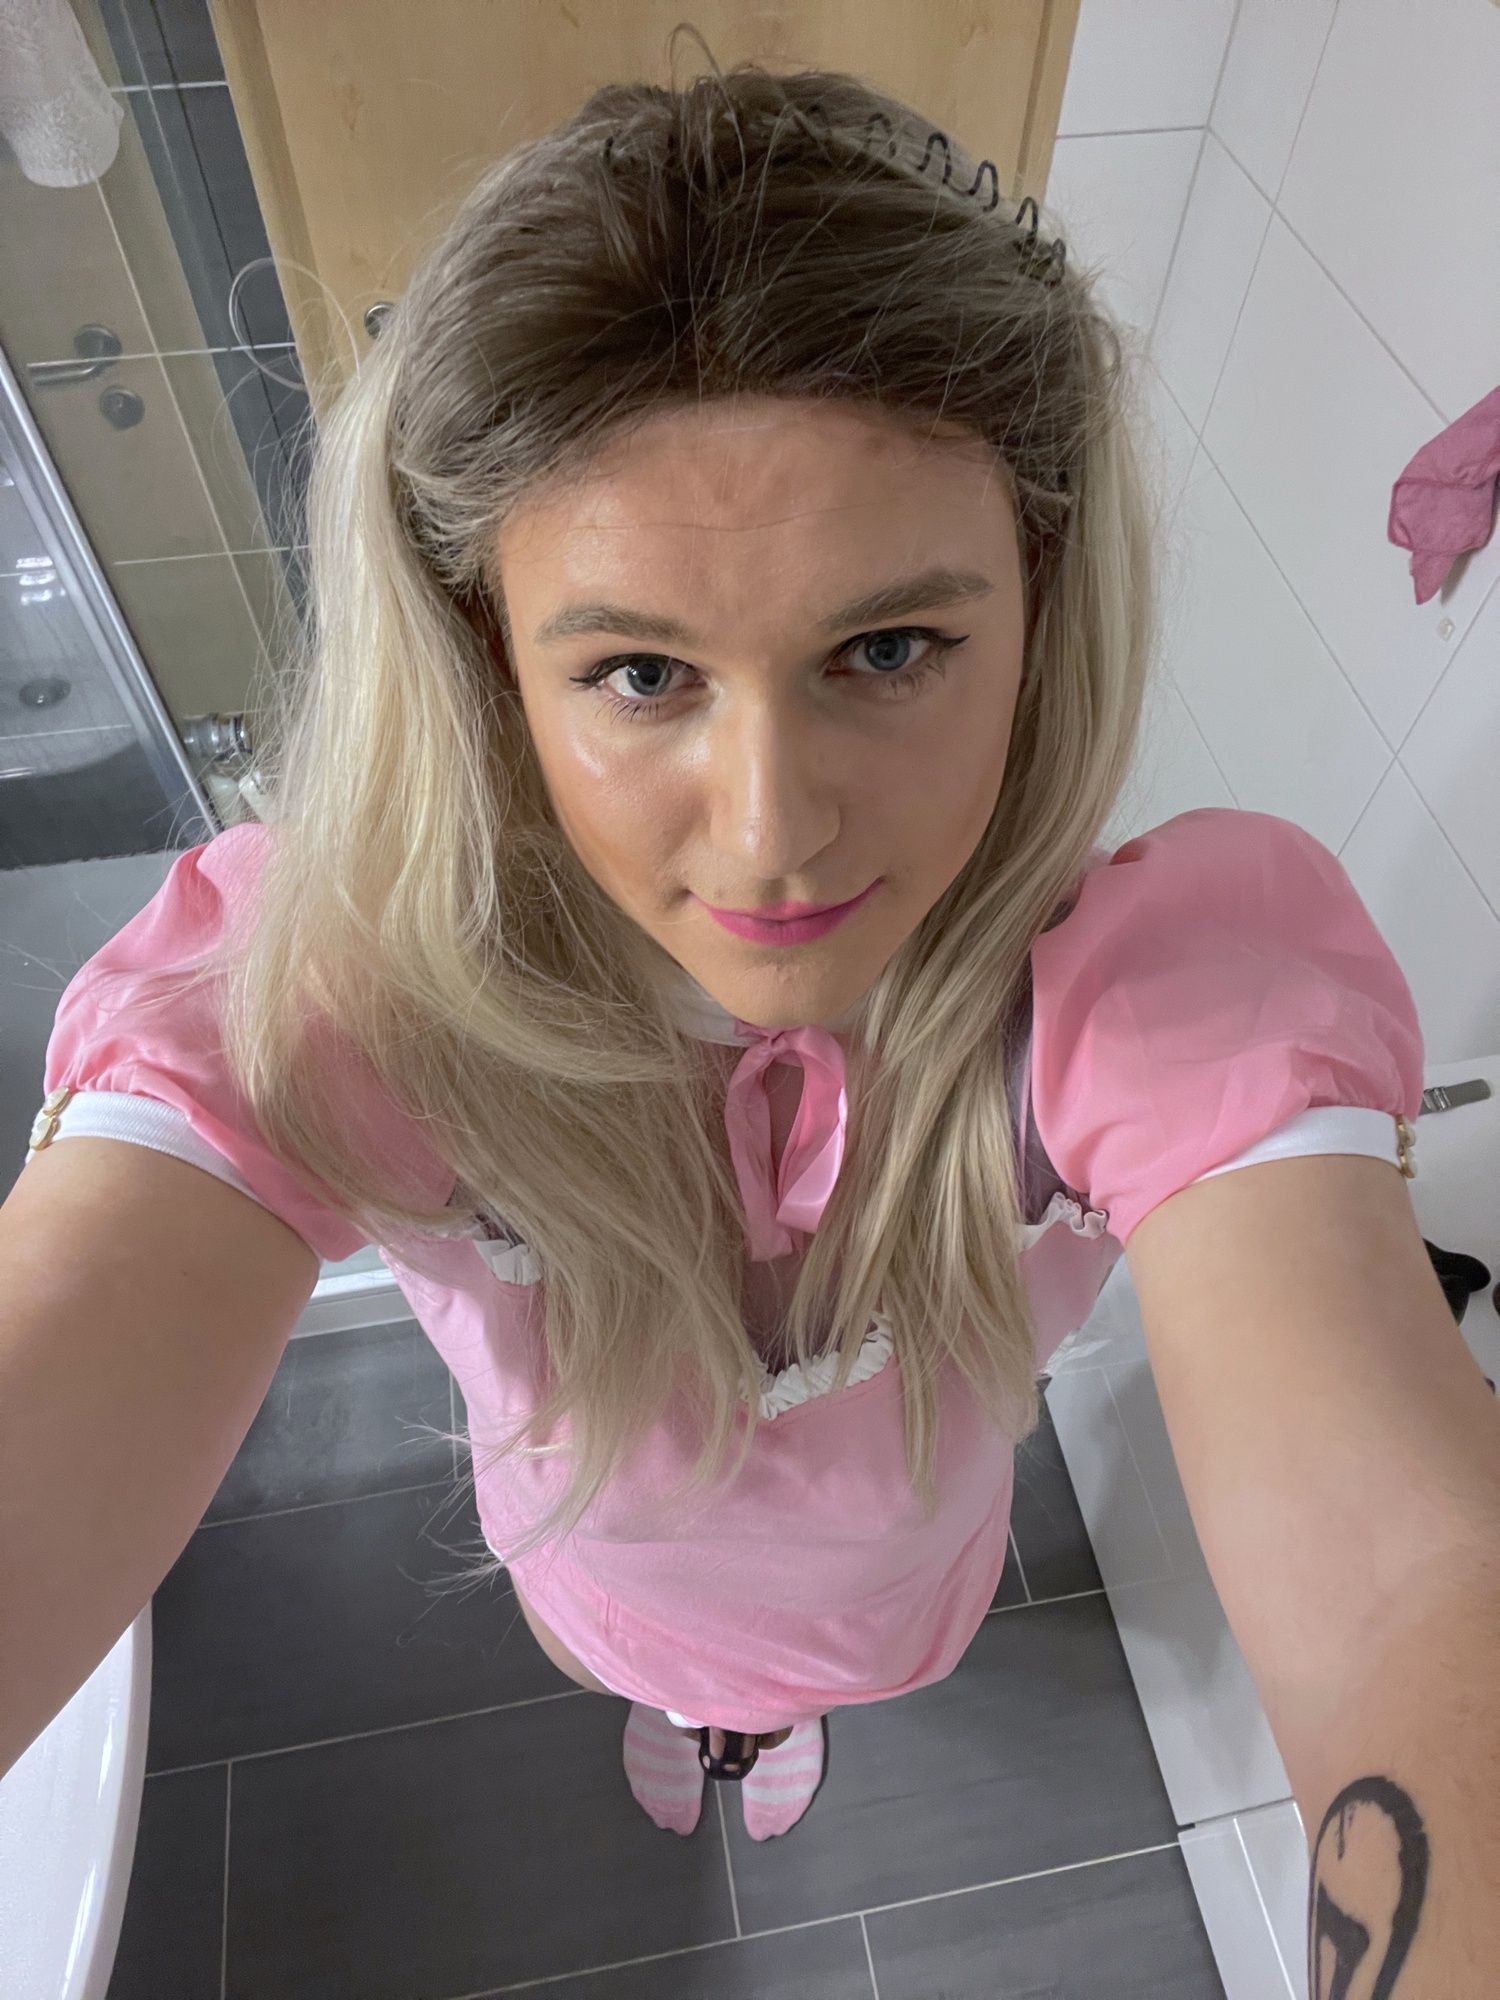 Sissy vallicxte in pink